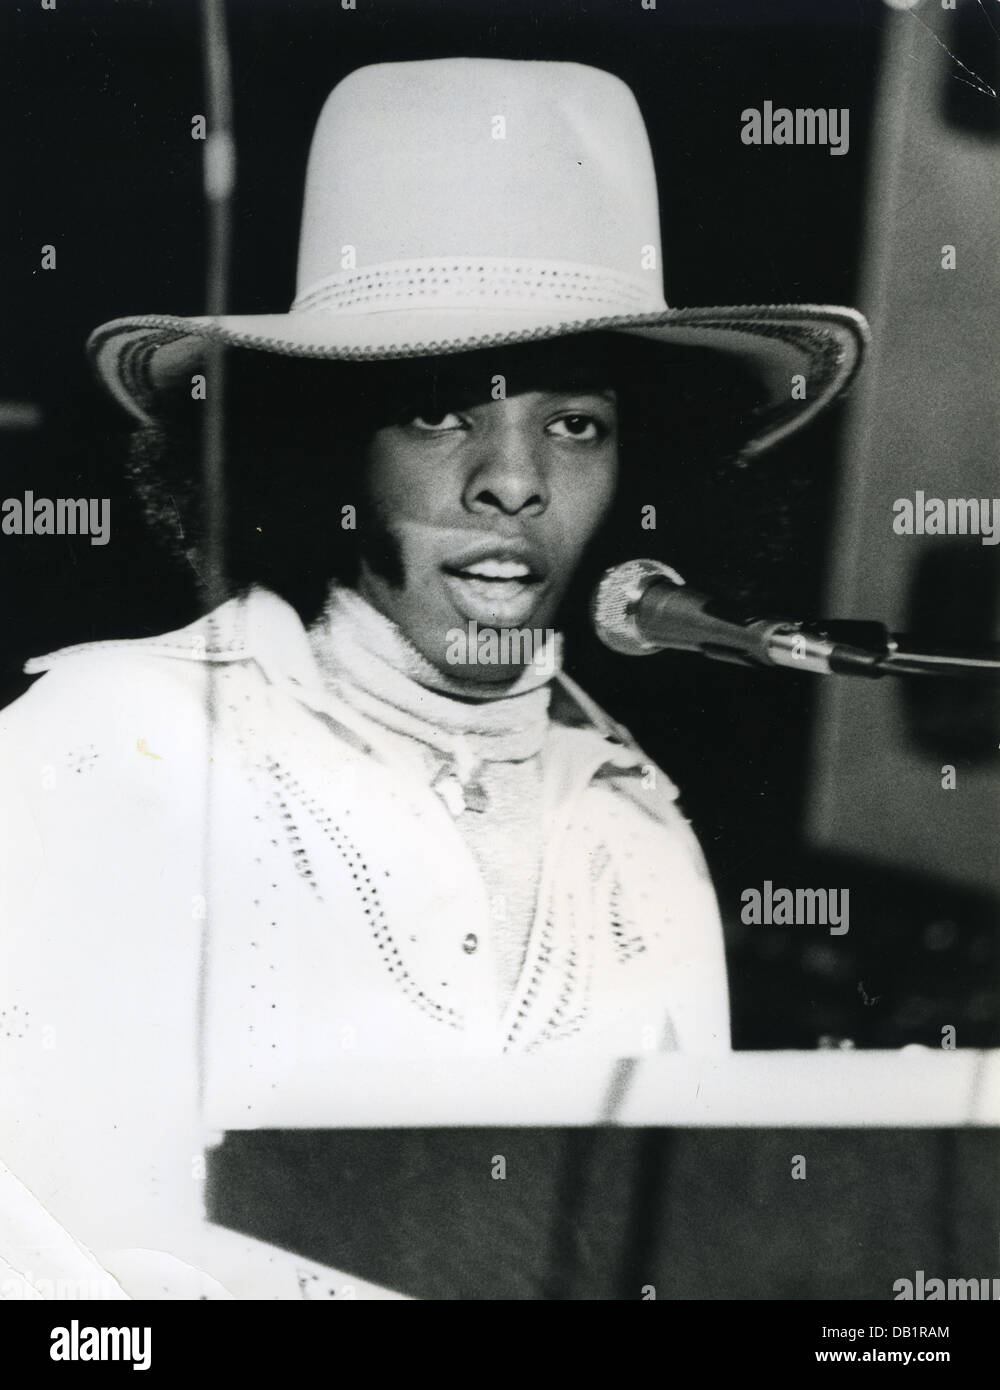 SLY AND THE FAMILY STONE  US funk band with Sly Stone about 1970 Stock Photo